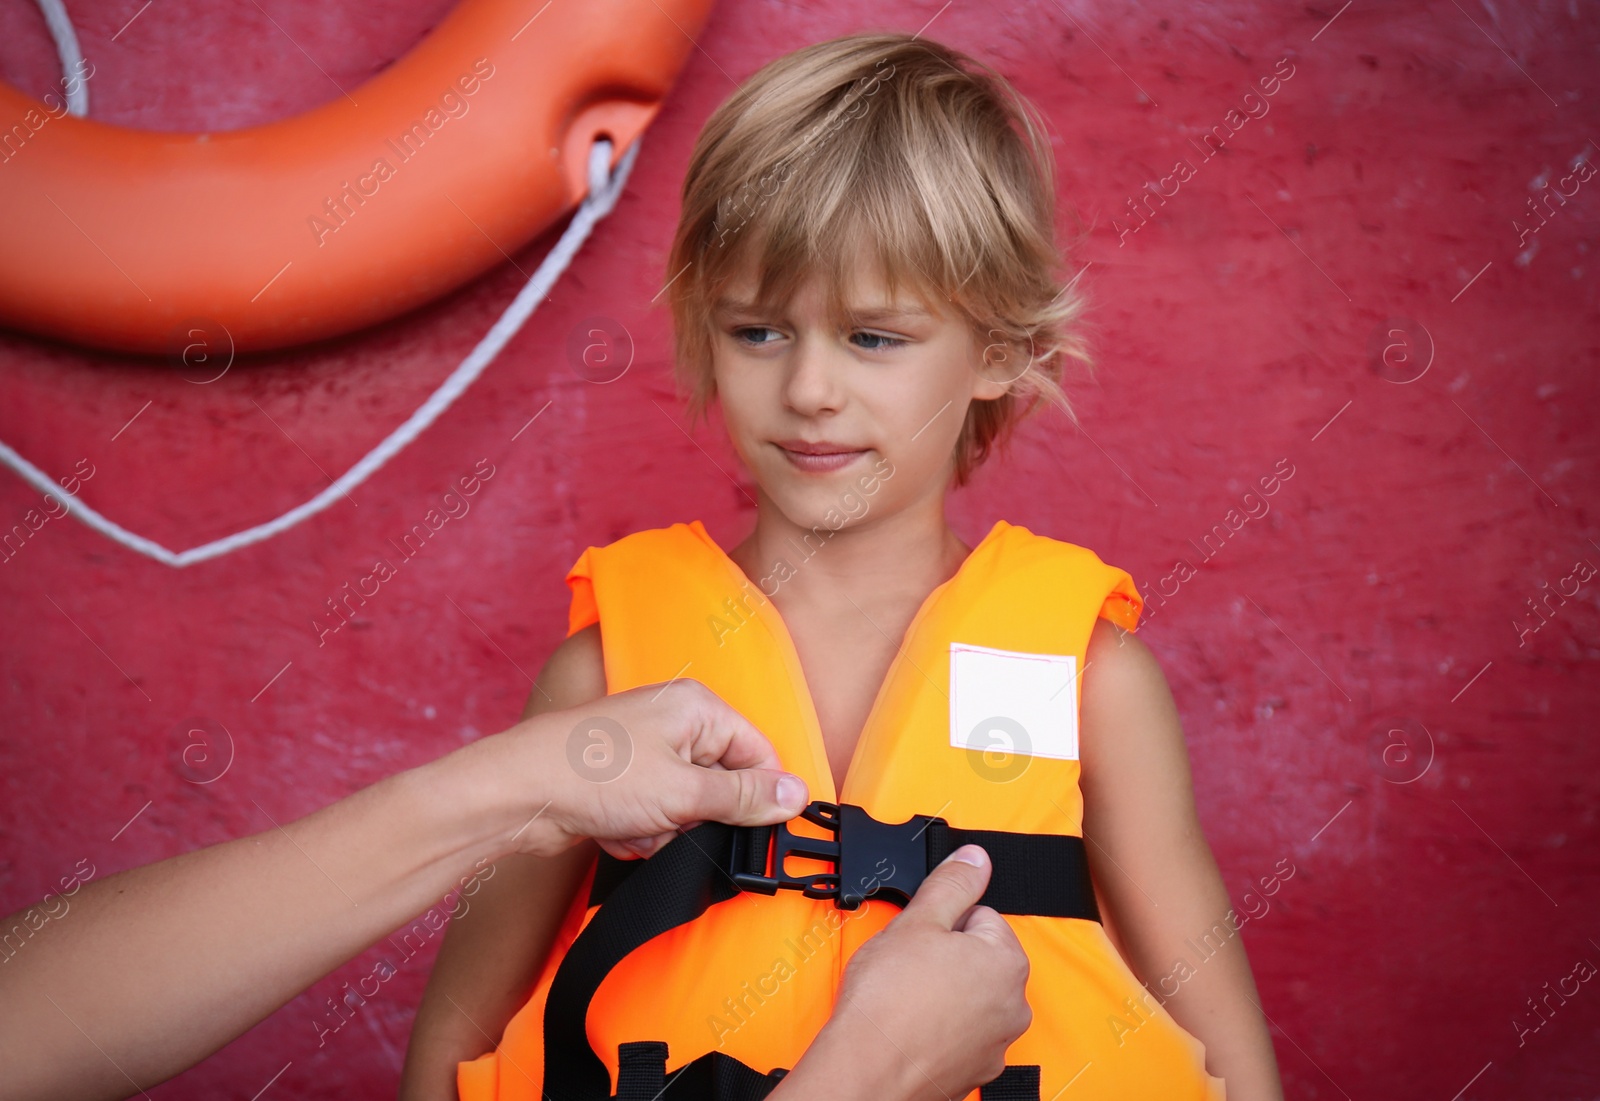 Photo of Rescuer putting orange life vest on child near red wall